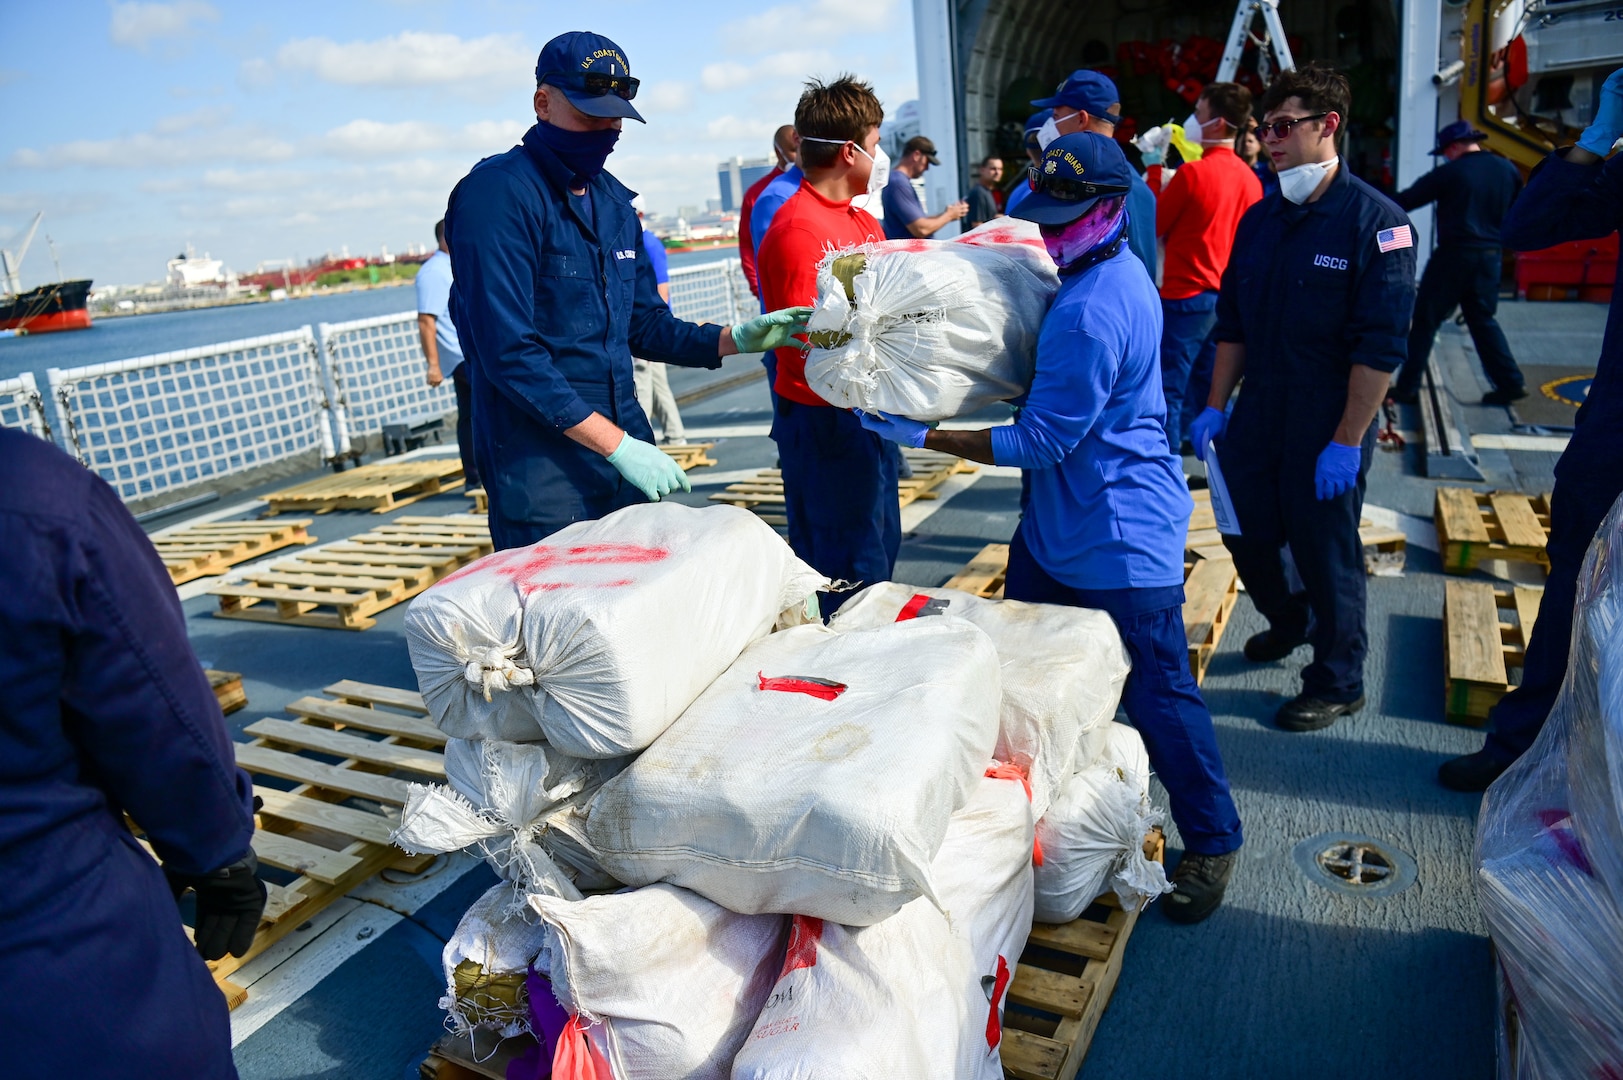 USCGC Mohawk (WMEC 913) crew members stack bales of illegal narcotics on the flight deck of the cutter